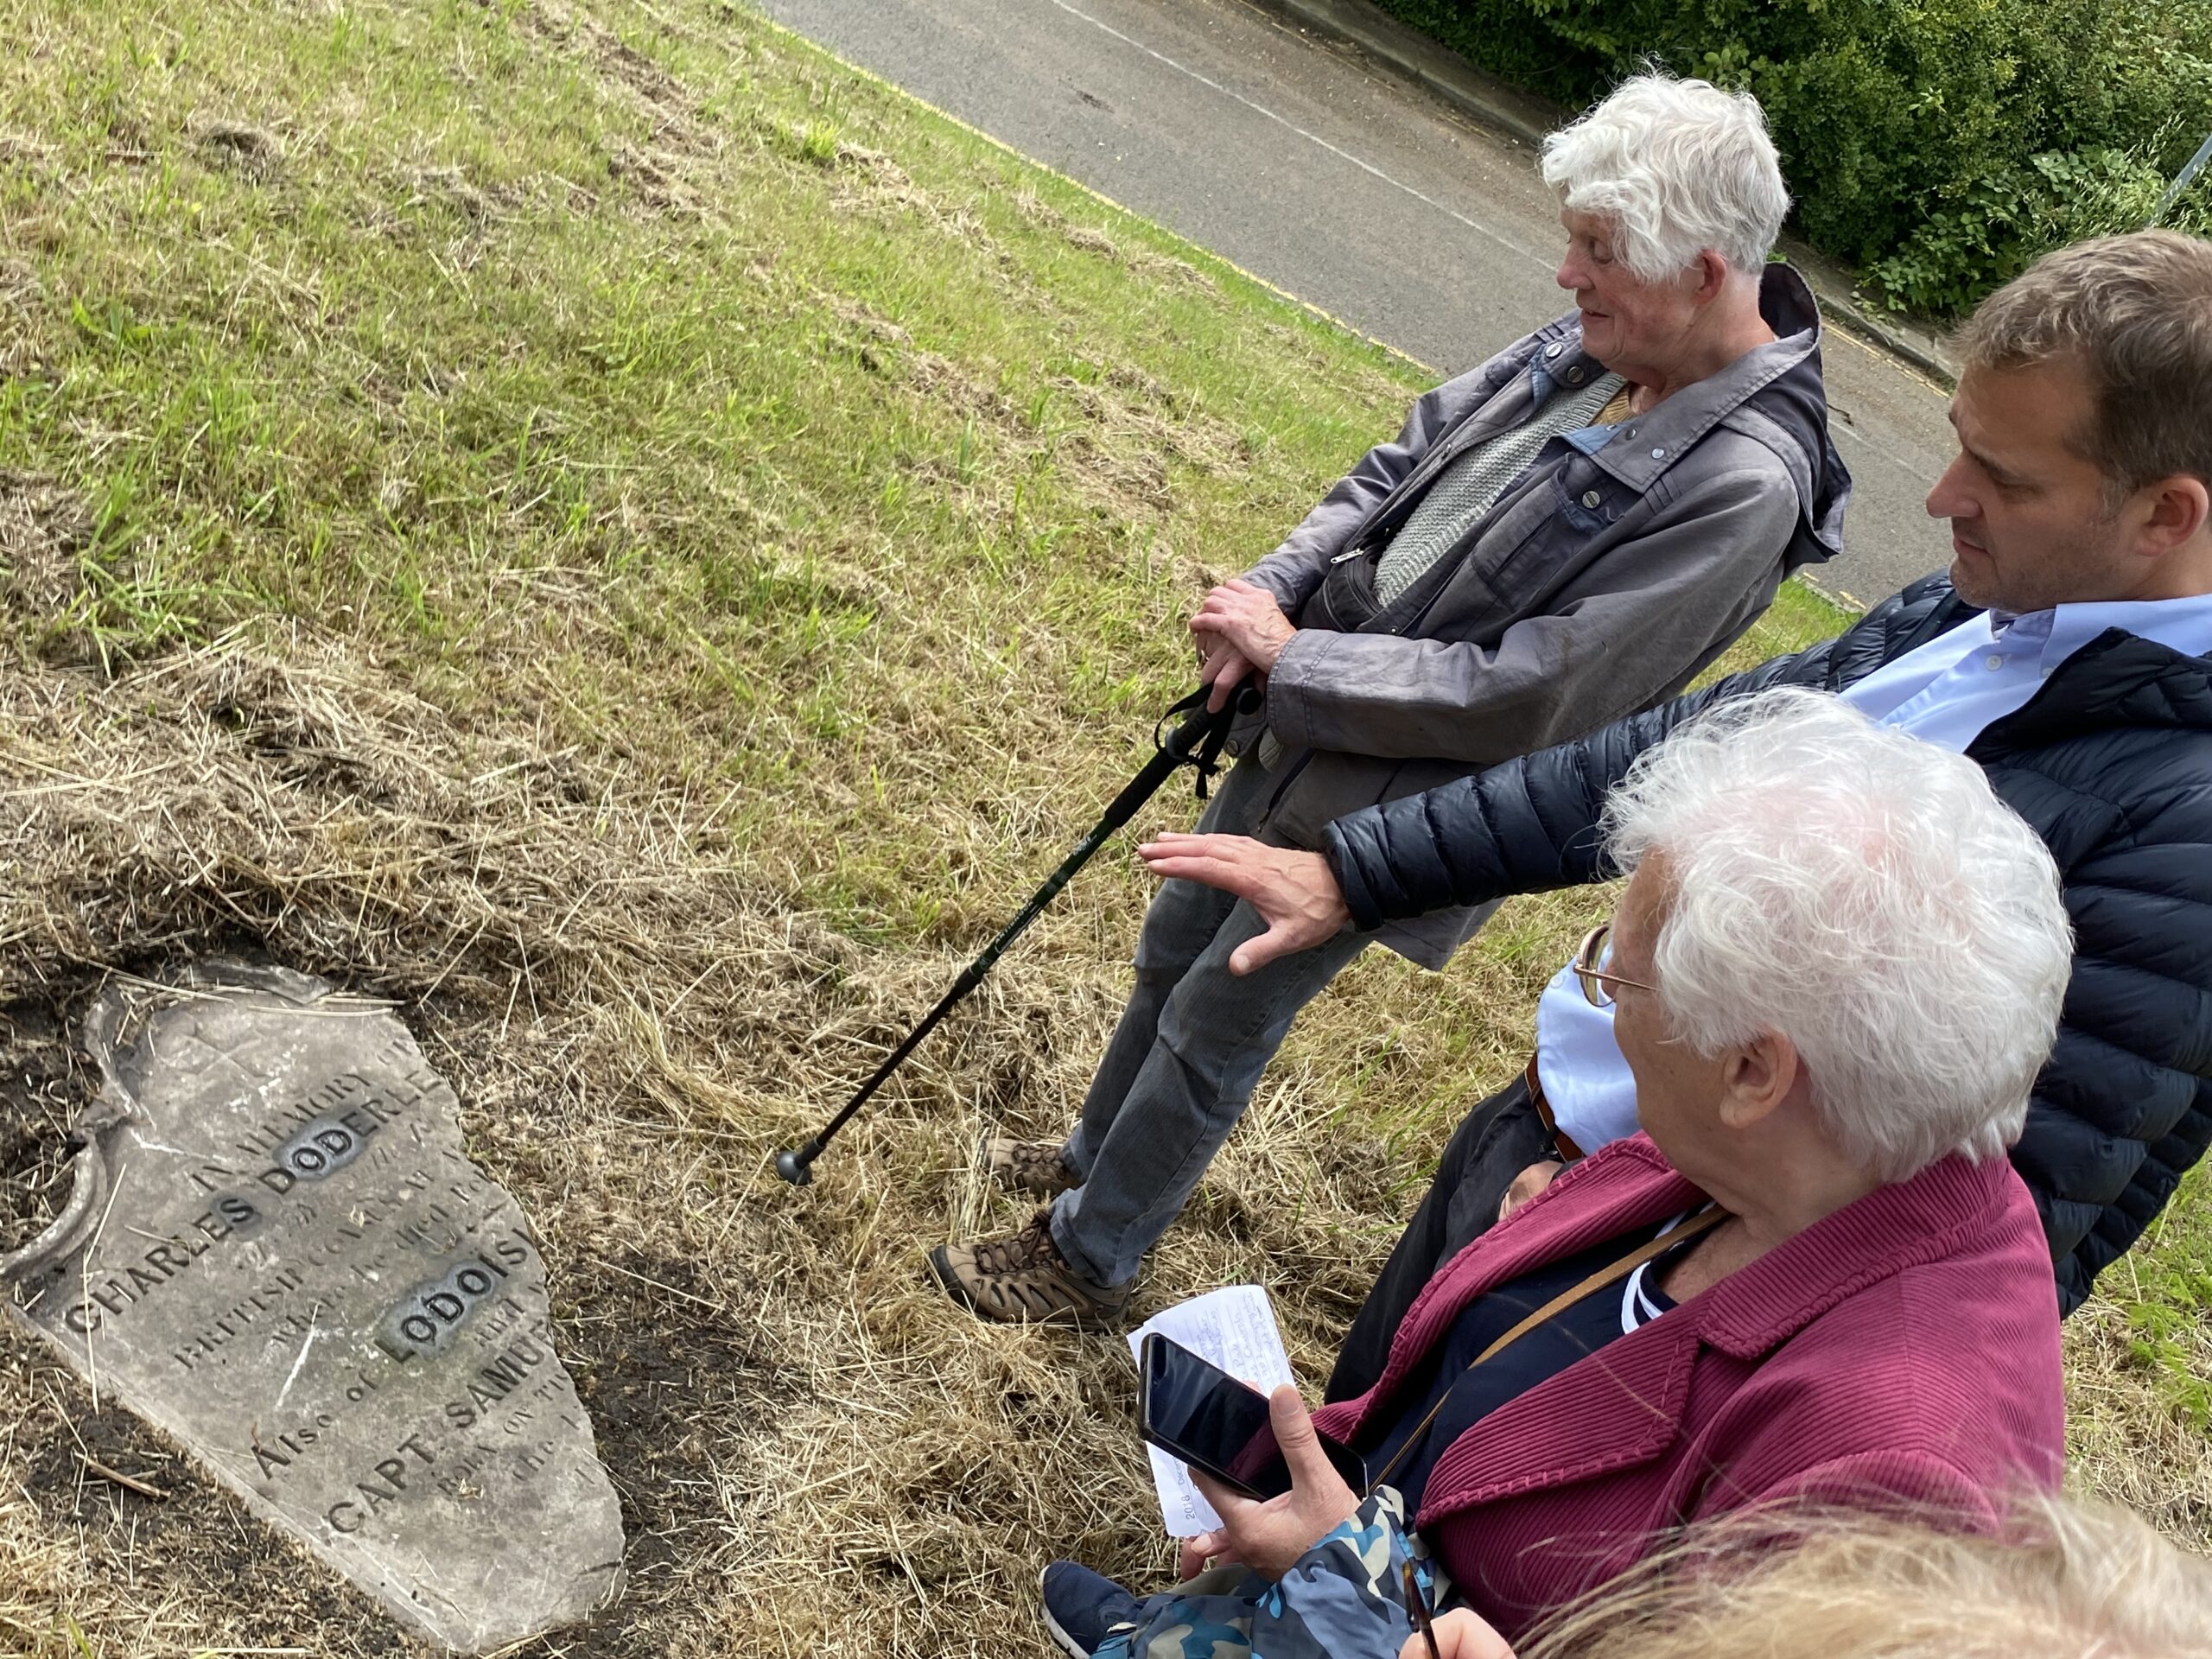 Visitors survey an uncovered headstone in what would have been the graveyard at St Hilda's Church